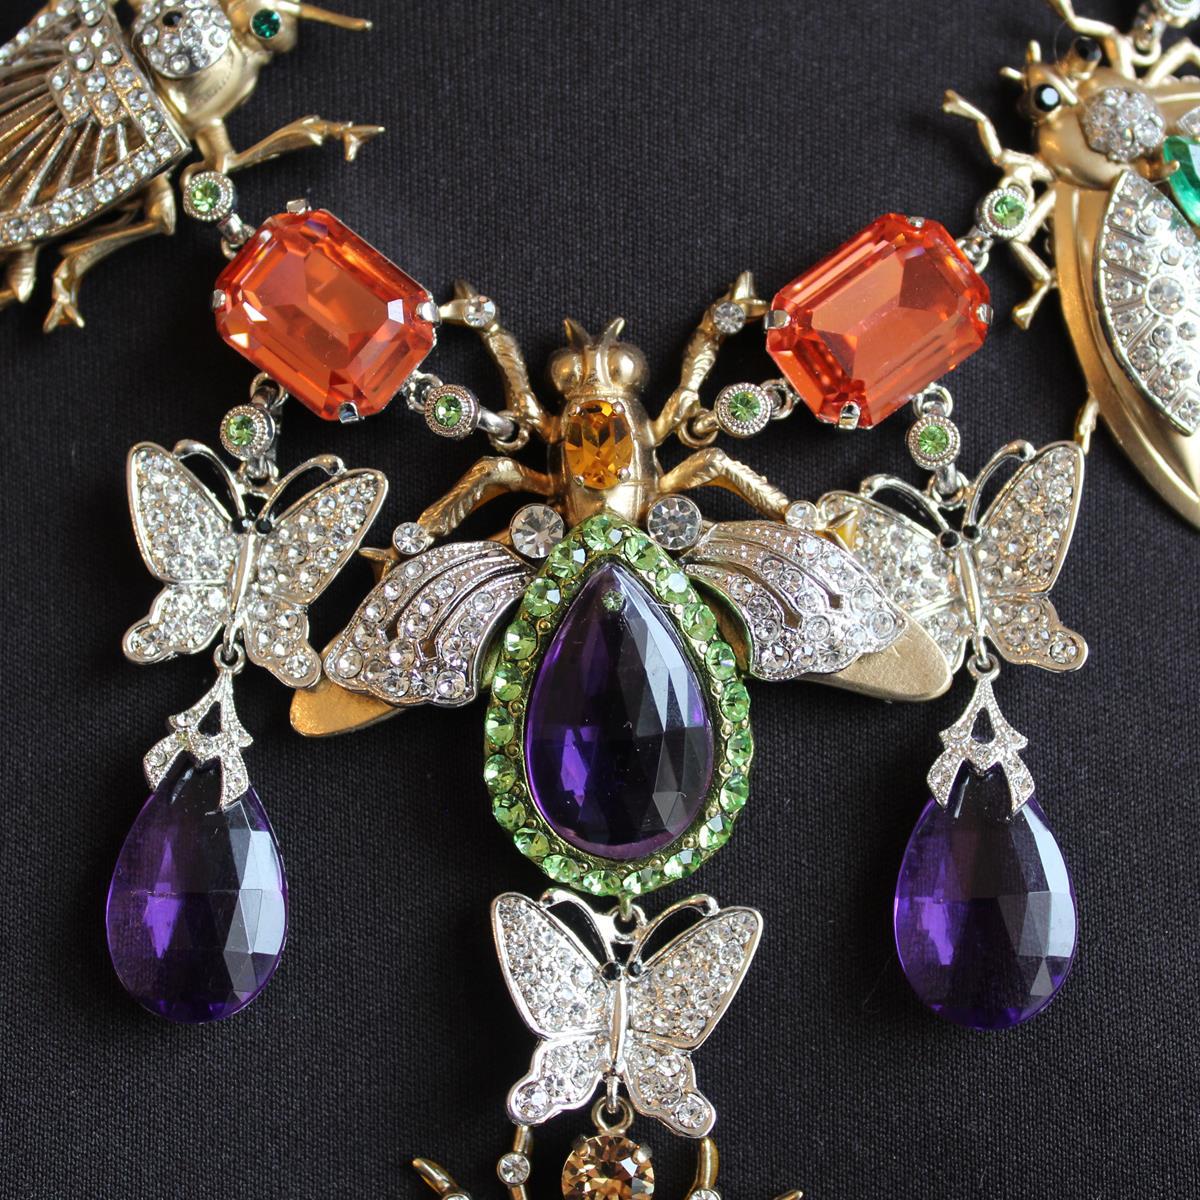 Stunning fancy piece by Carlo Zini Milano
New summer 2019 colection !
Non allergenic rhodium
Opaque Gold dipped
Bees theme
Amazing creation of swarovski crystals, rhinestones and resins
100% Artisanal work
Made in Milano
Worldwide express shipping